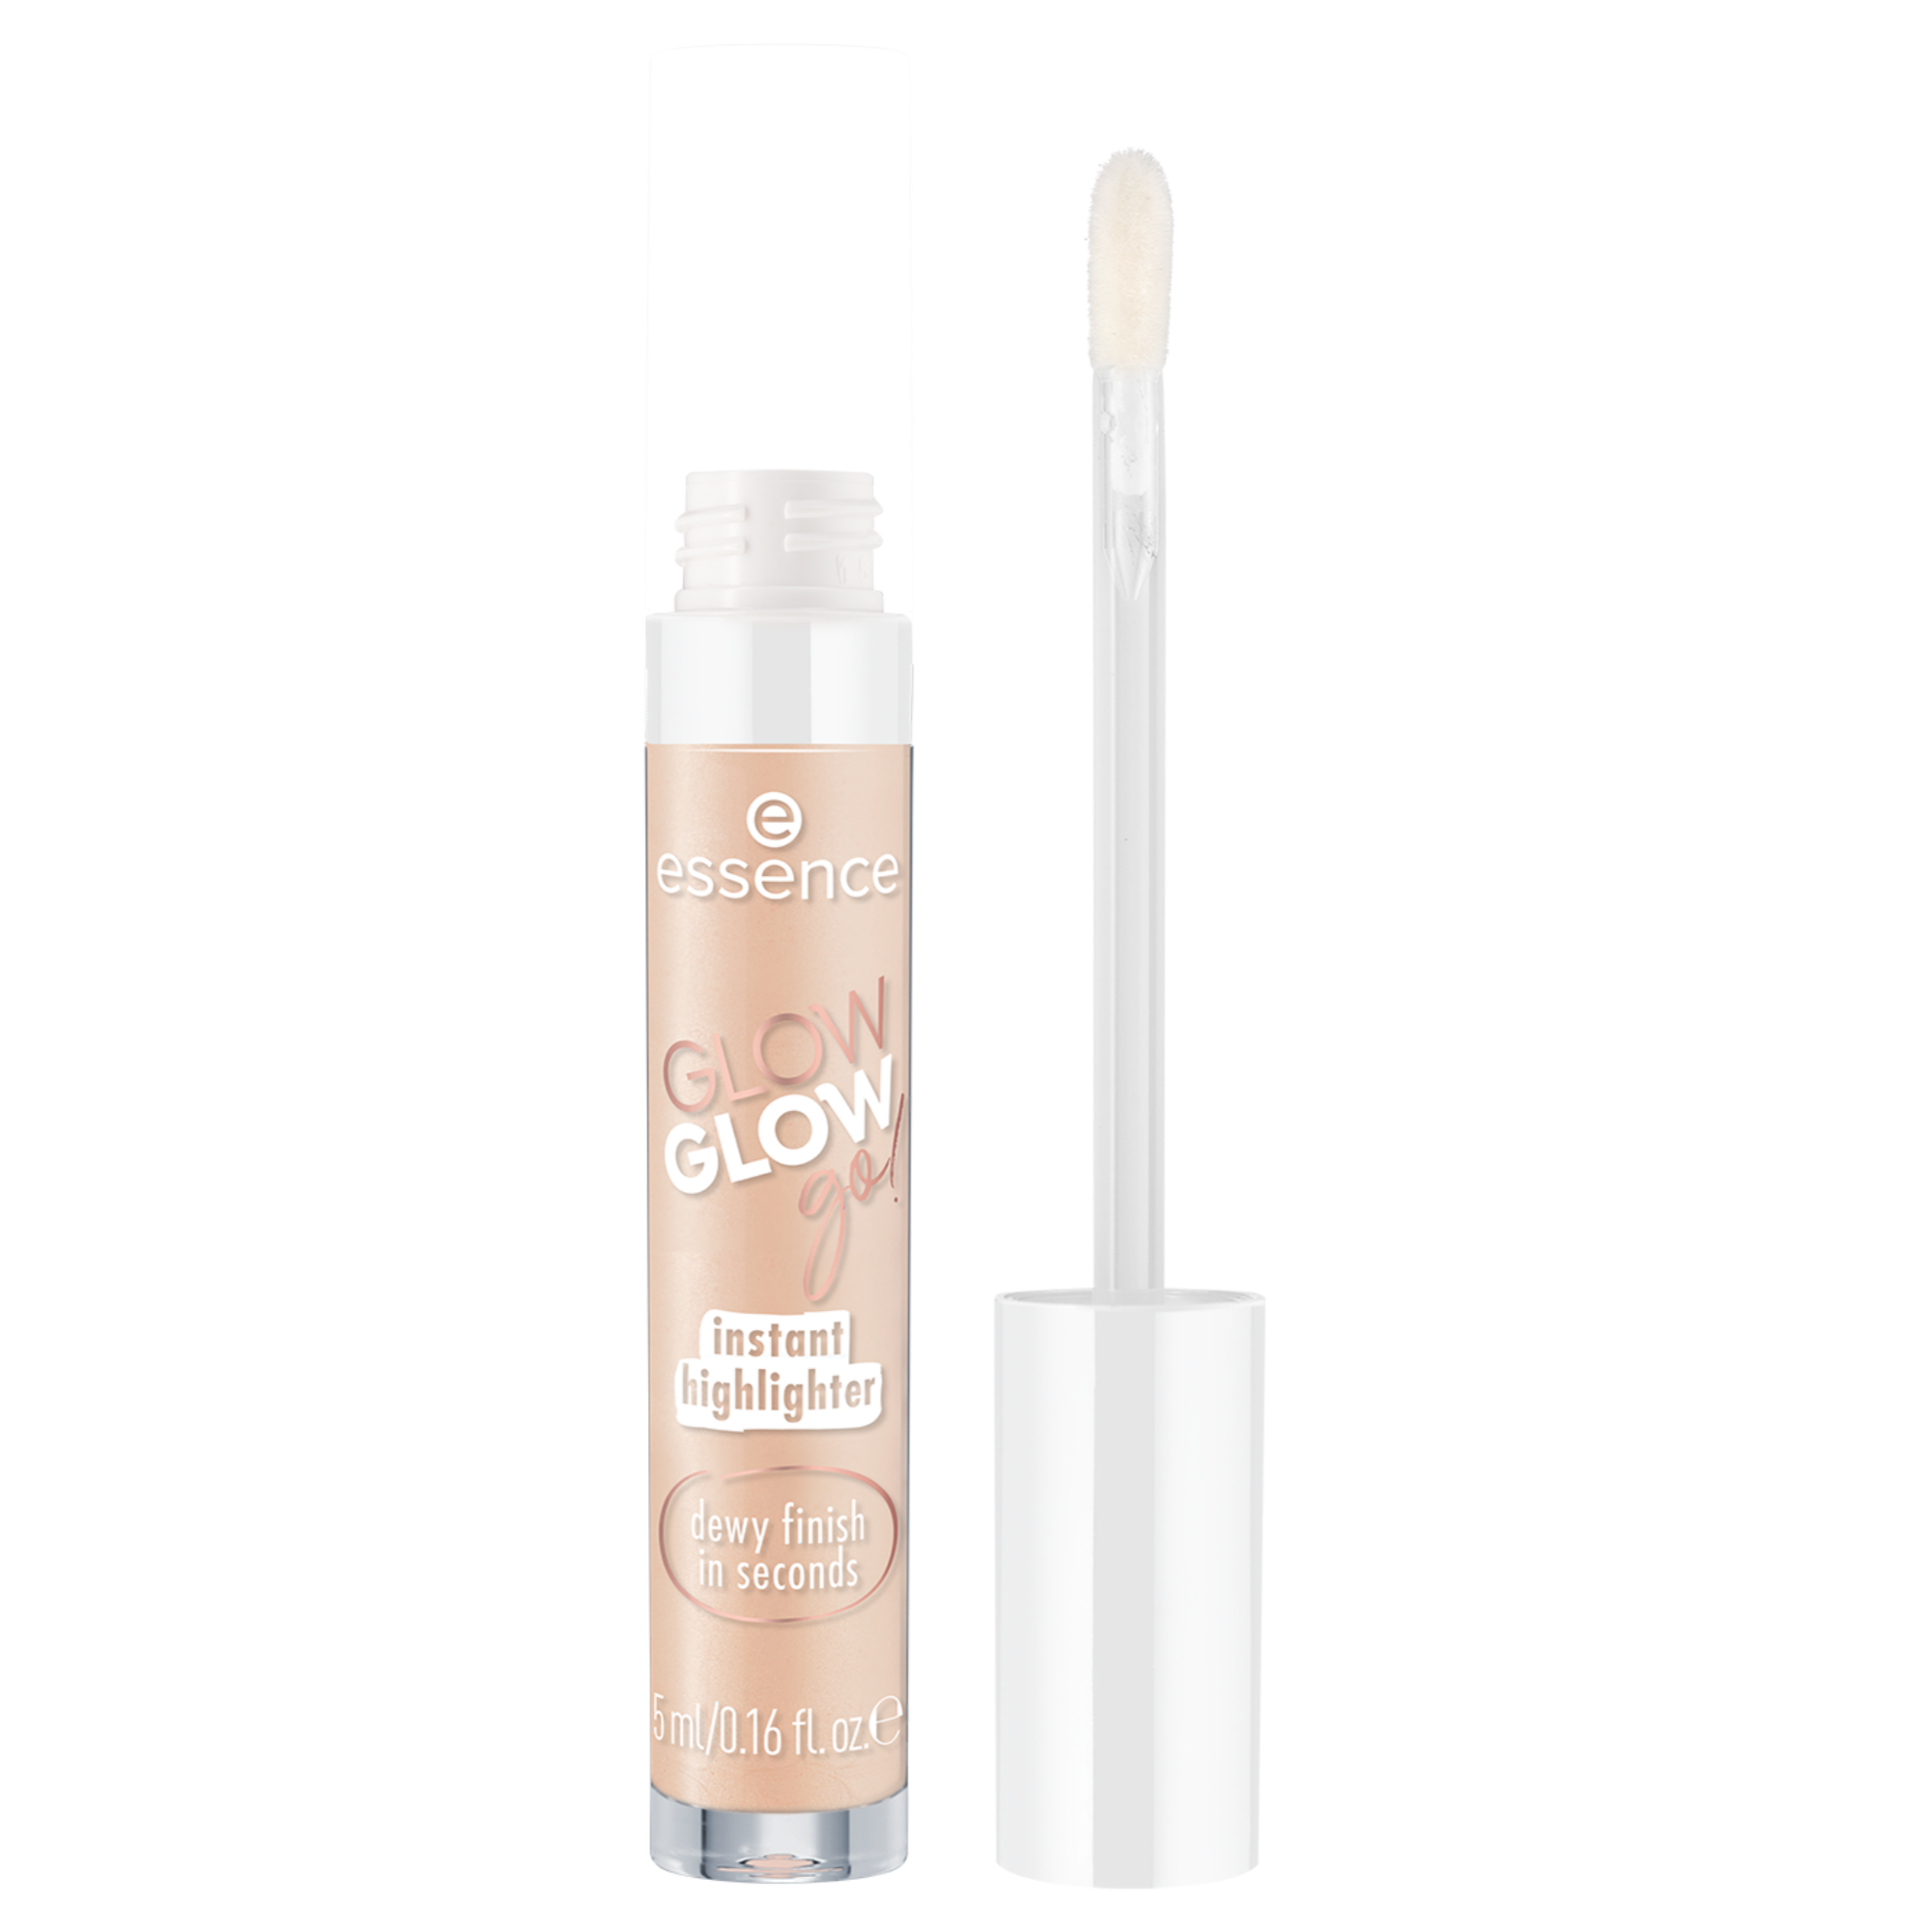 GLOW GLOW go! instant highlighter